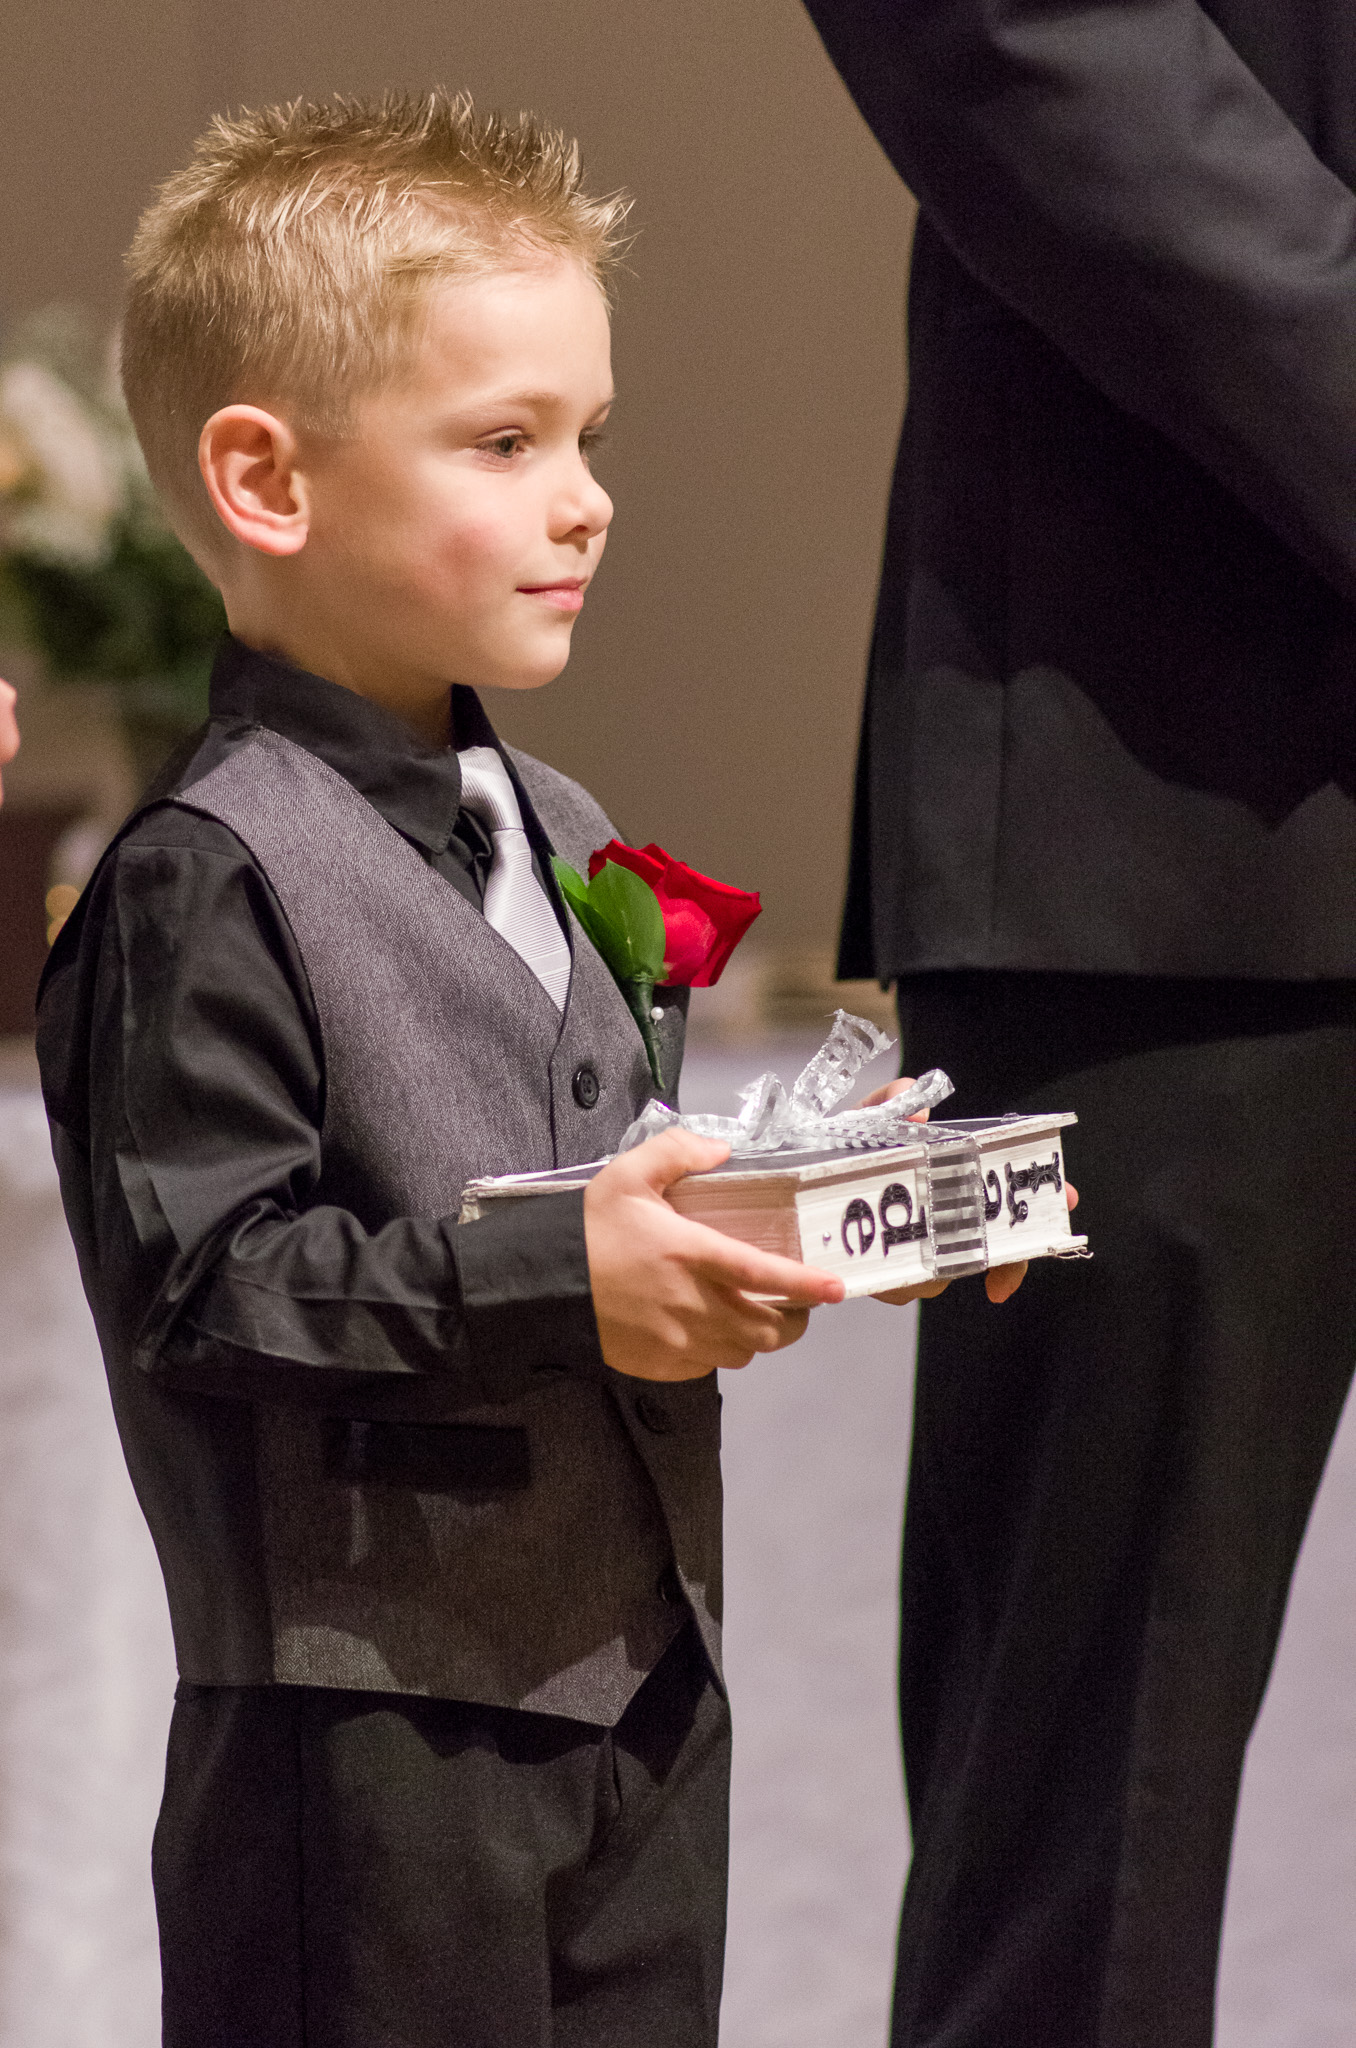 Another adorable ring bearer.... a trend I see!